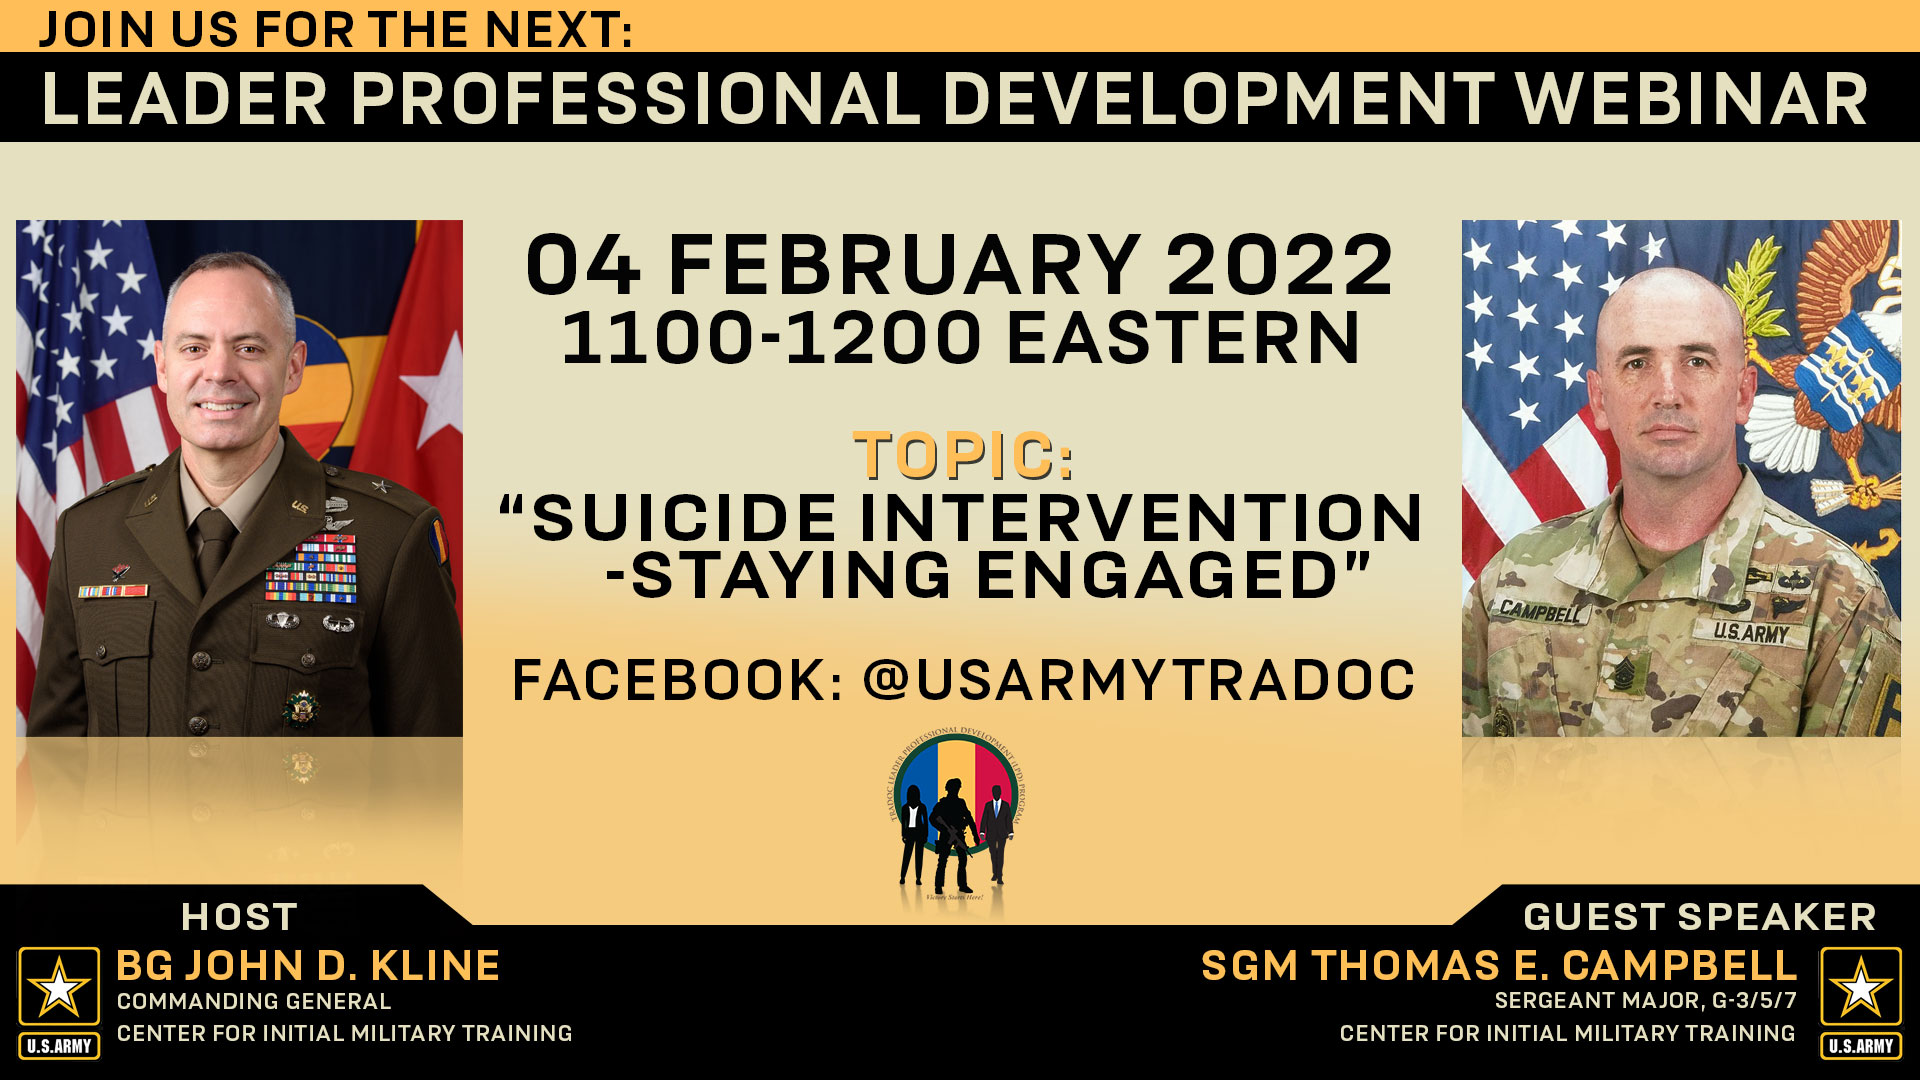 https://www.tradoc.army.mil/wp-content/uploads/2022/01/FINAL-Join-Us-for-the-Next-SUICIDE-INTERVENTION-STAYING-ENGAGED.